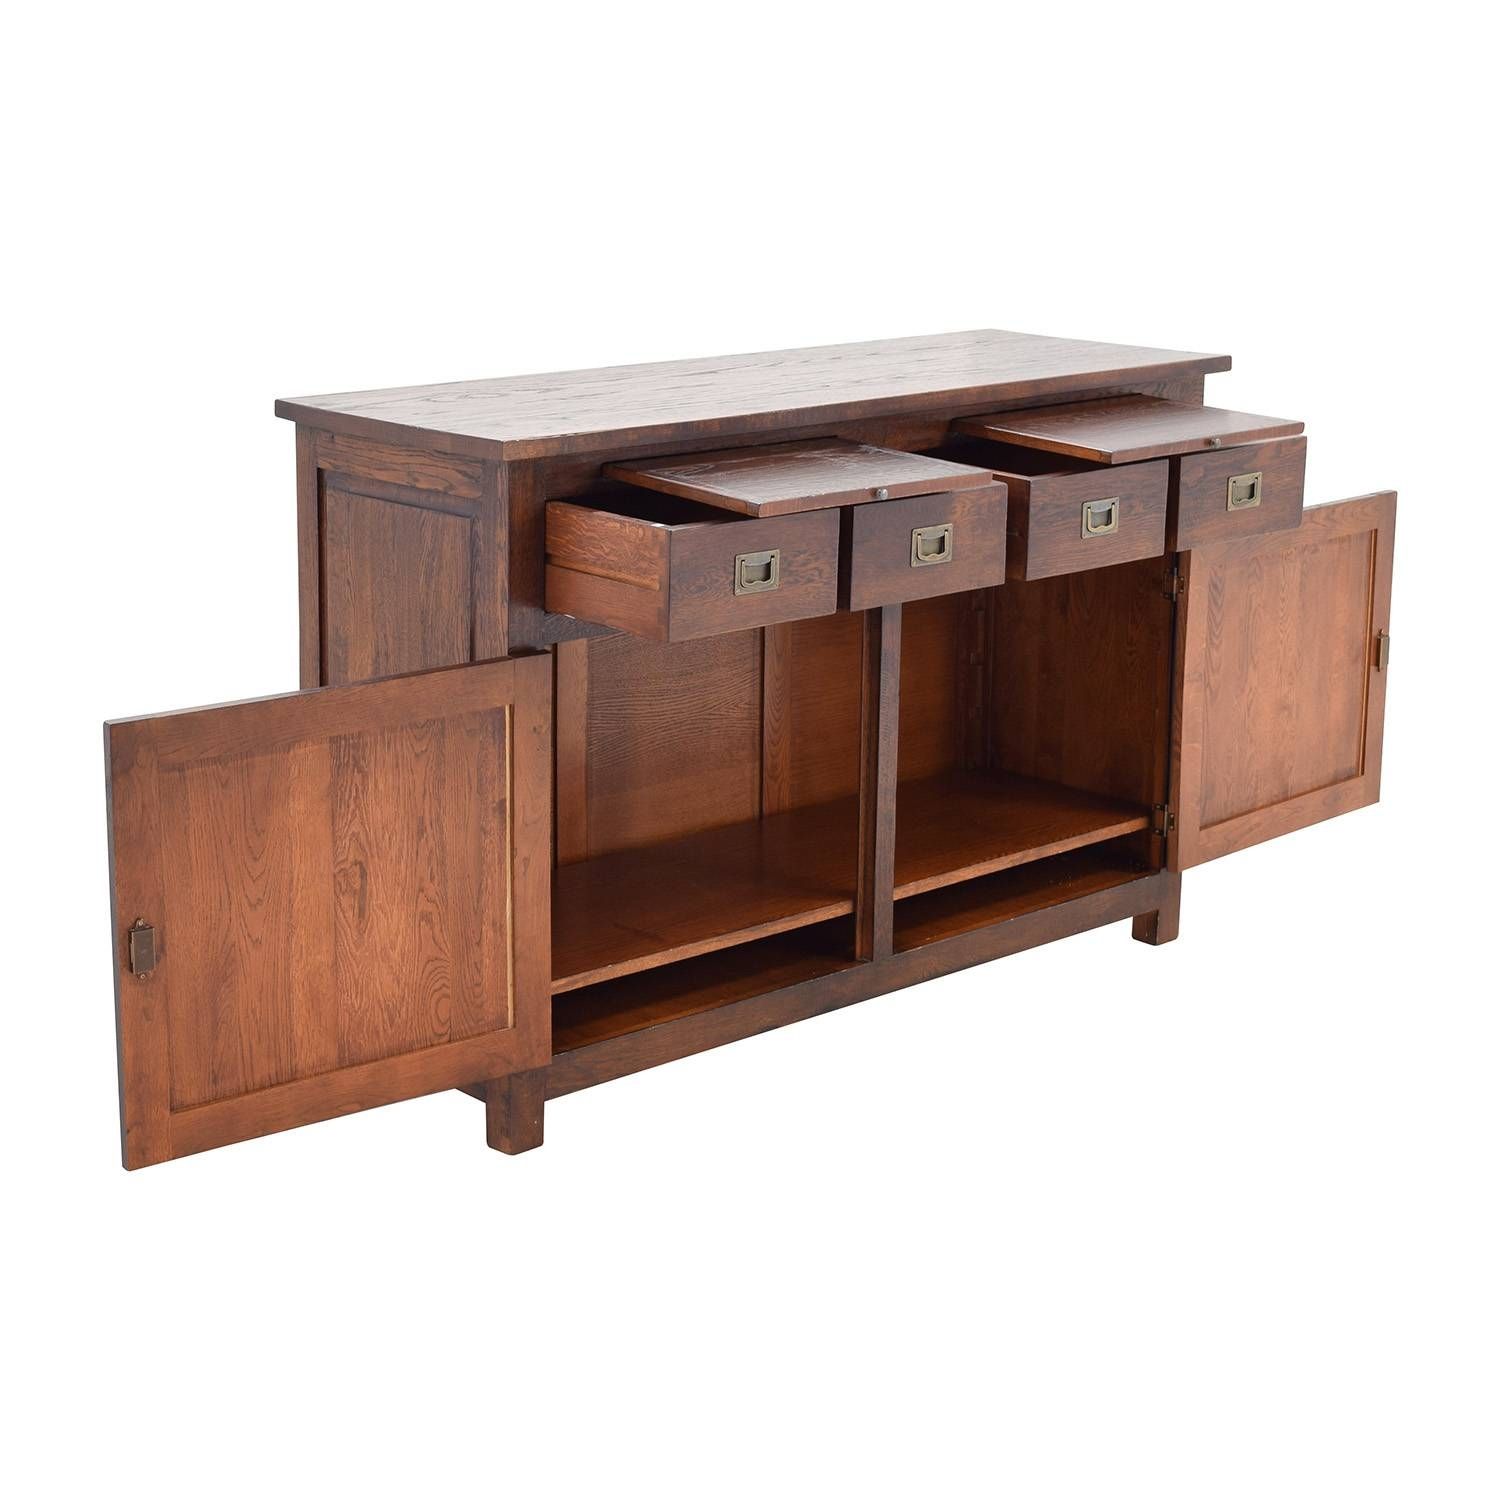 67% Off – Crate And Barrel Crate & Barrel Bordeaux Buffet Intended For Crate And Barrel Sideboards (View 2 of 15)